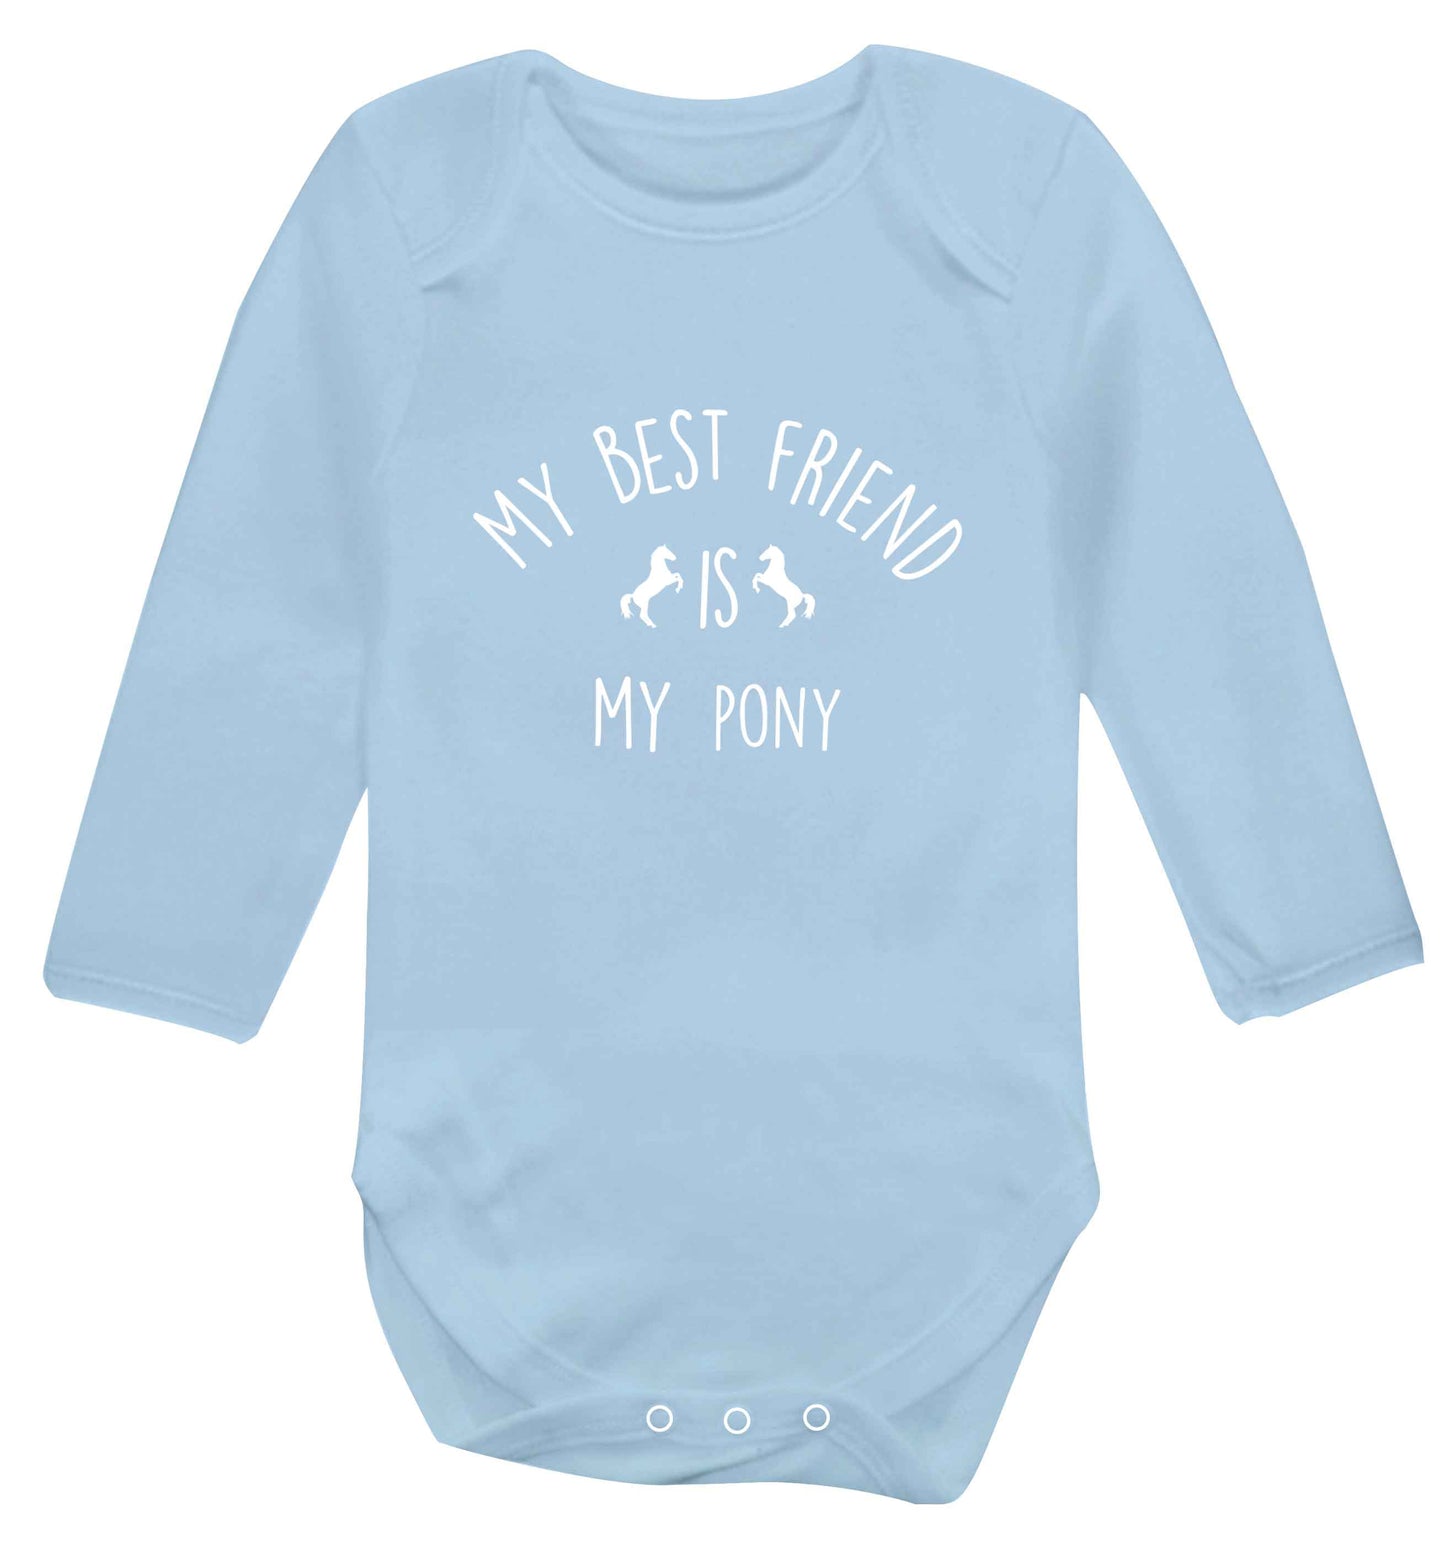 My best friend is my pony baby vest long sleeved pale blue 6-12 months